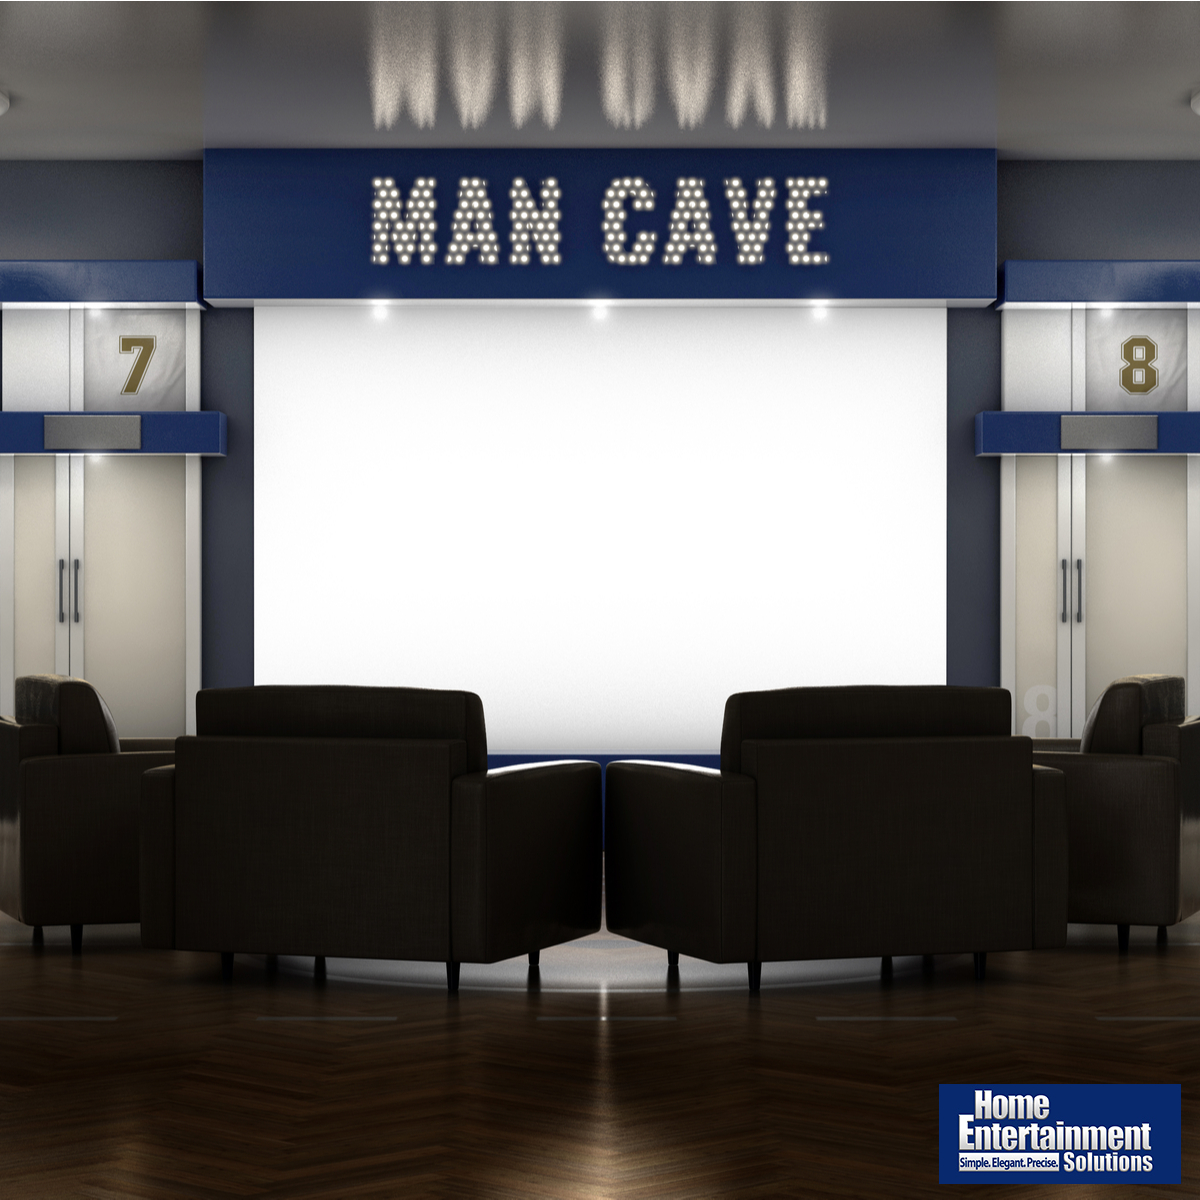 Talk With Us About Your Man-Cave Home Entertainment Installation In Monroe!